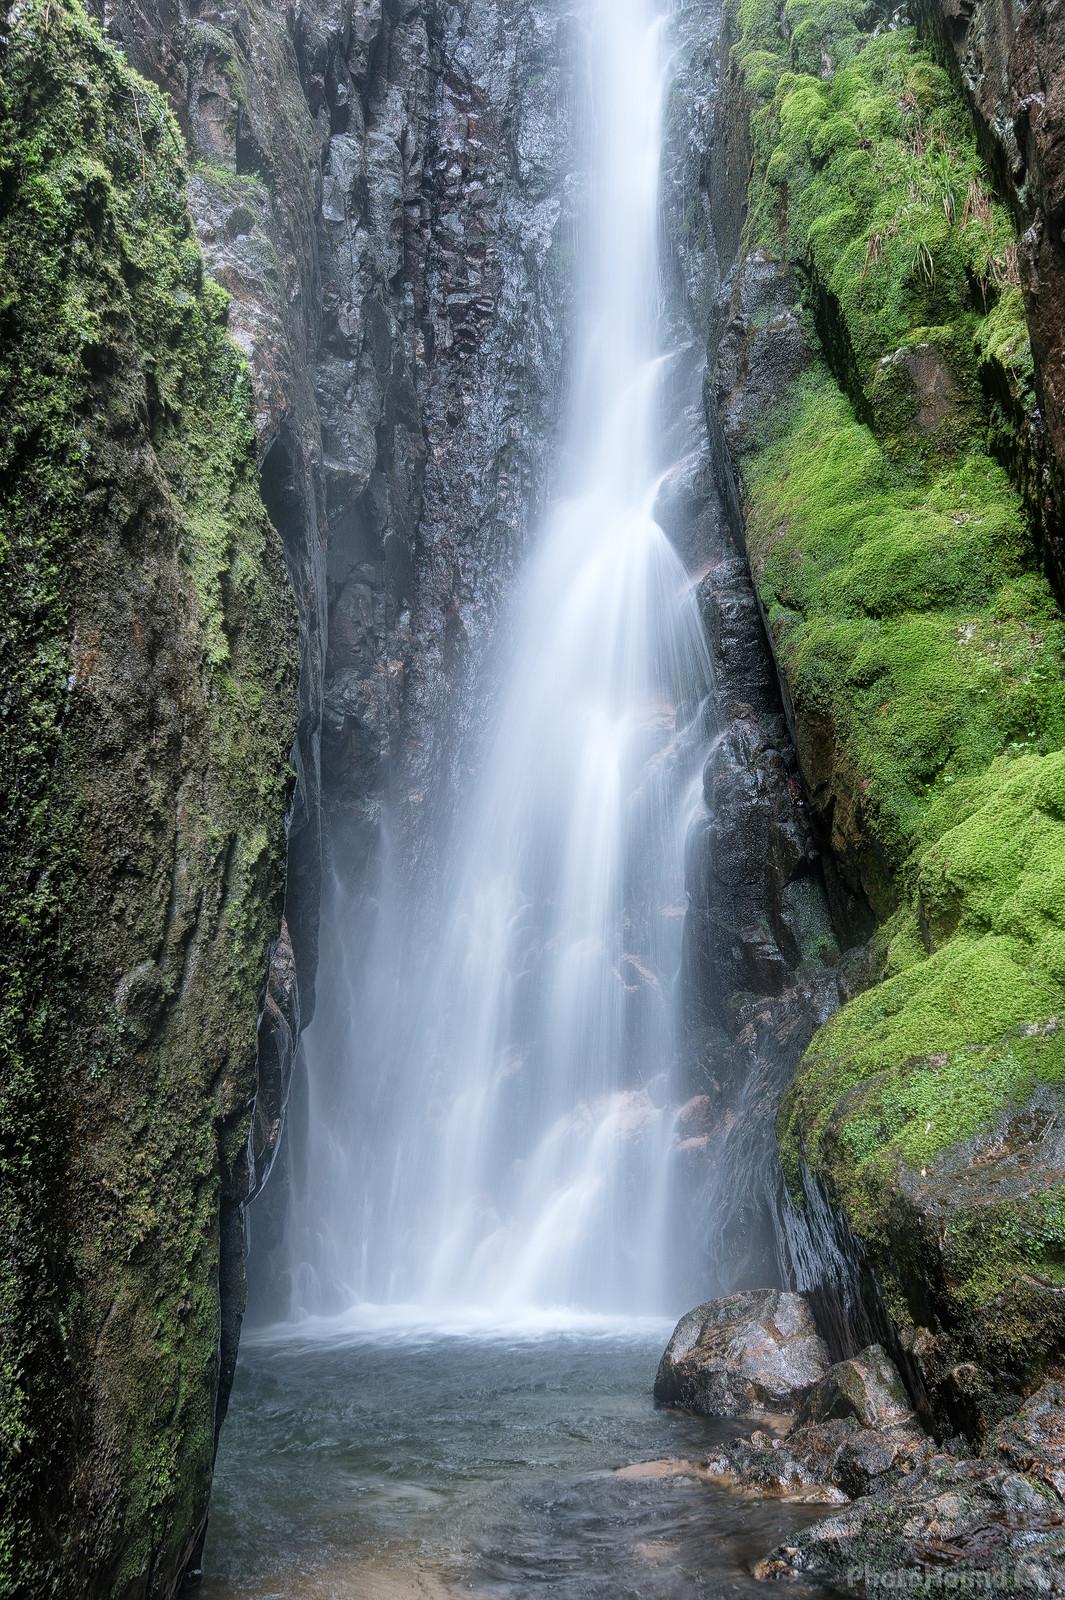 Image of Scale Force, Lake District by Richard Lizzimore